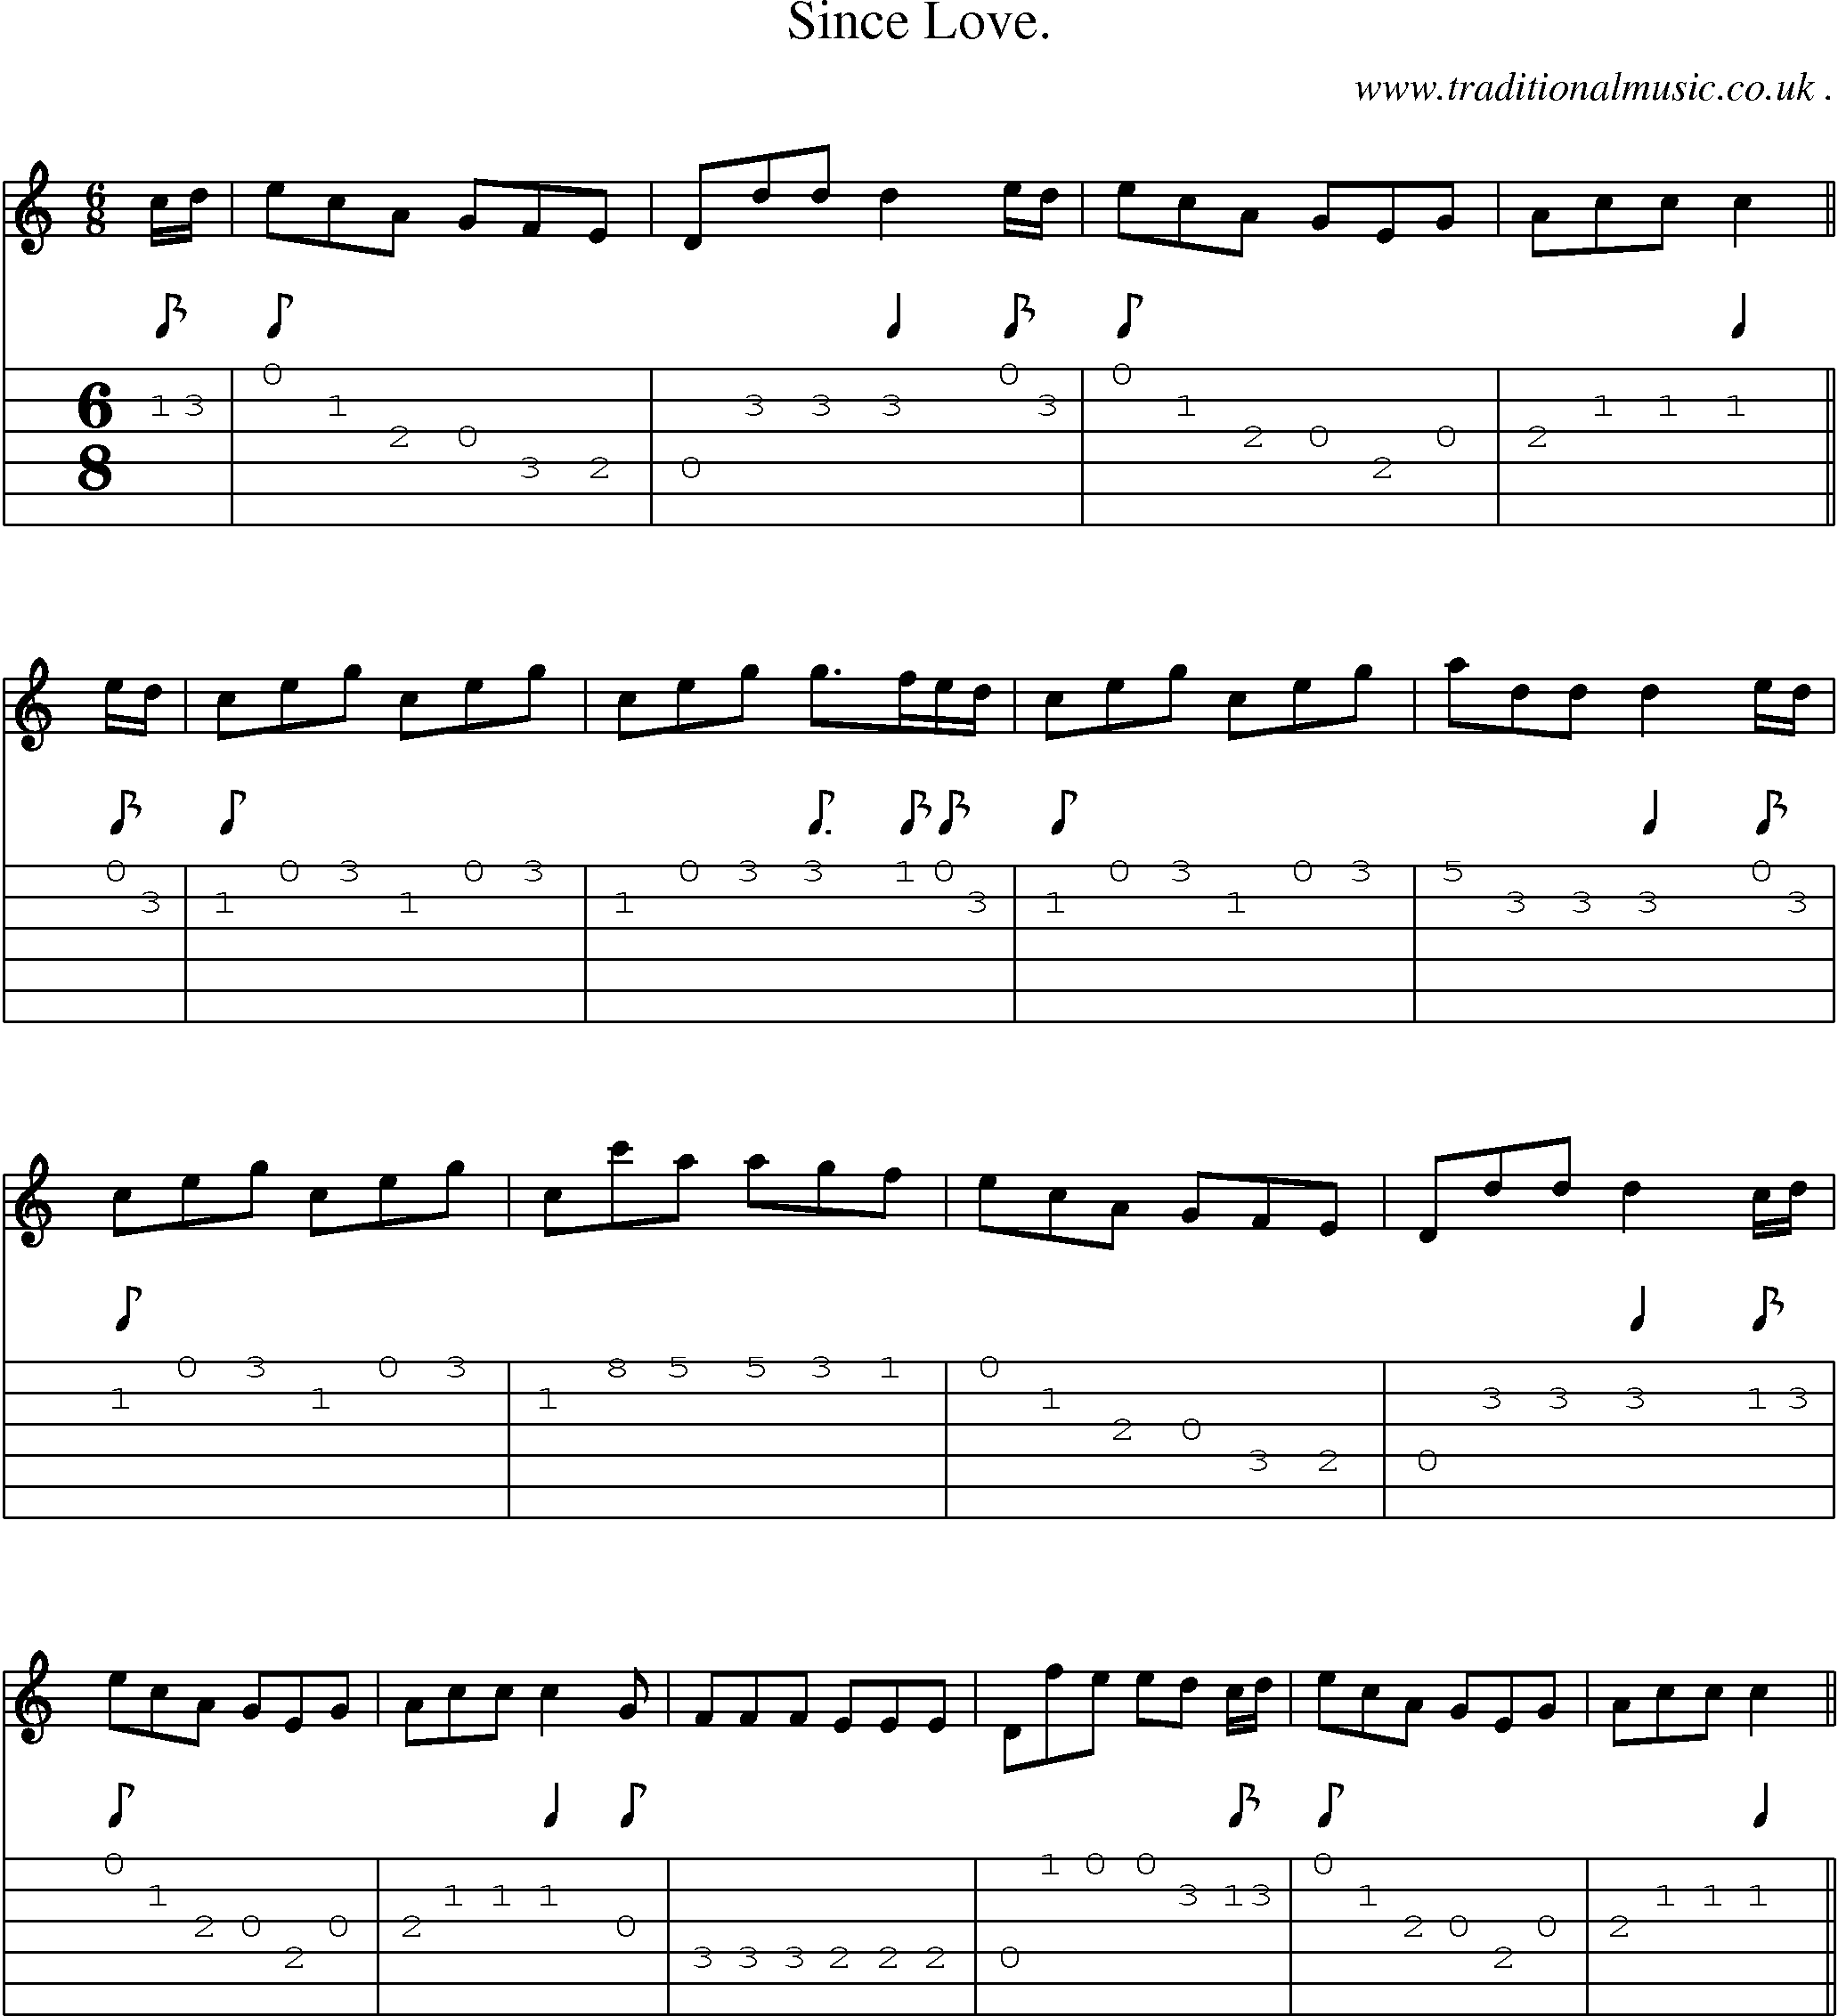 Sheet-Music and Guitar Tabs for Since Love